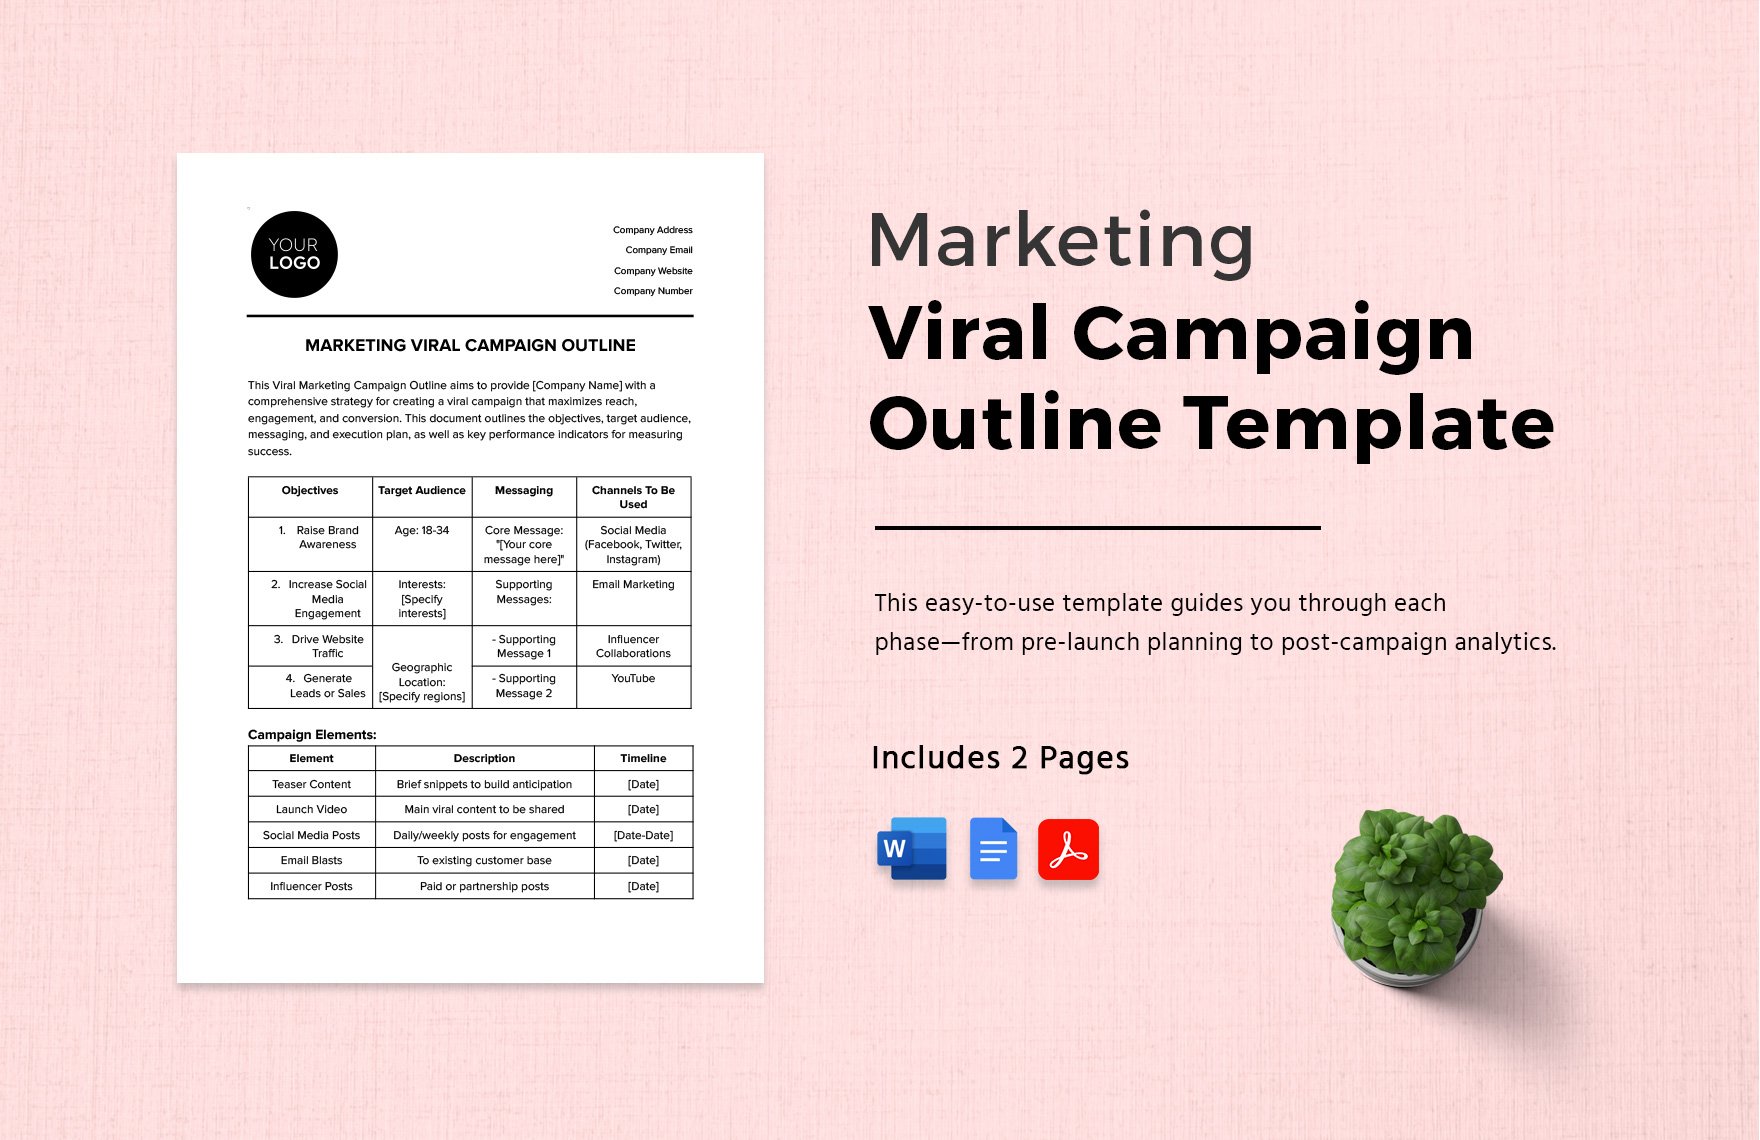 Marketing Viral Campaign Outline Template in Word, Google Docs, PDF